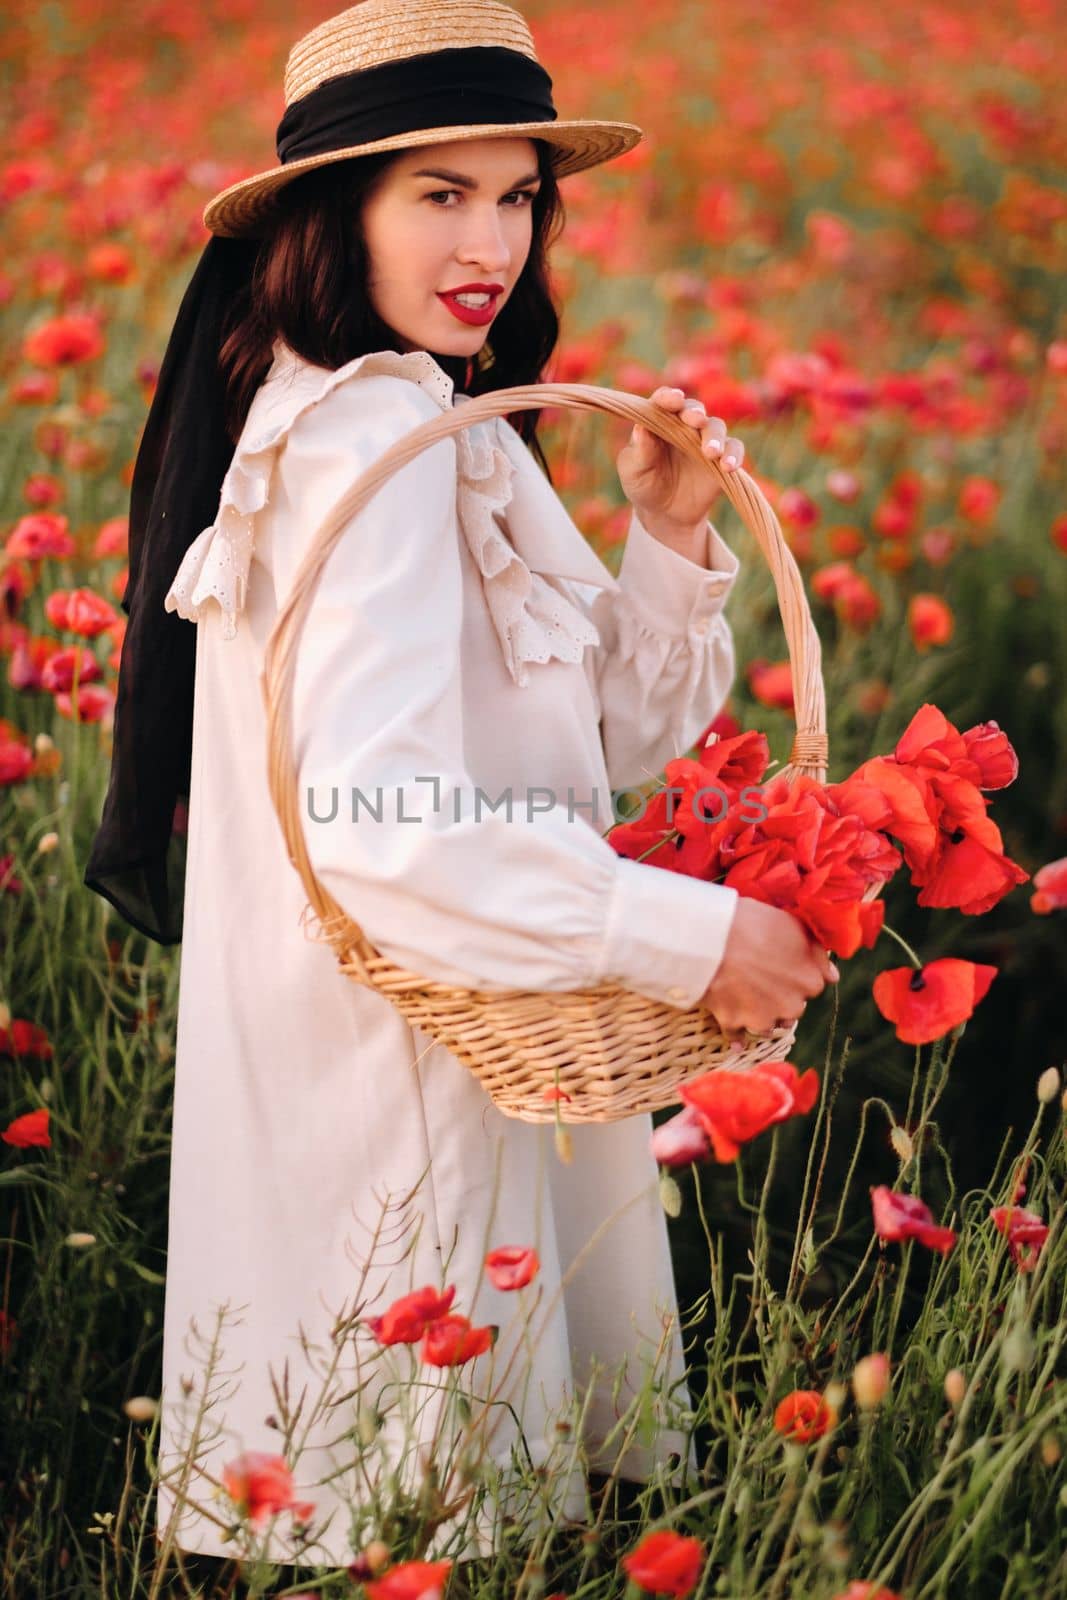 A girl in a white dress and with a basket of poppies walks through a poppy field by Lobachad